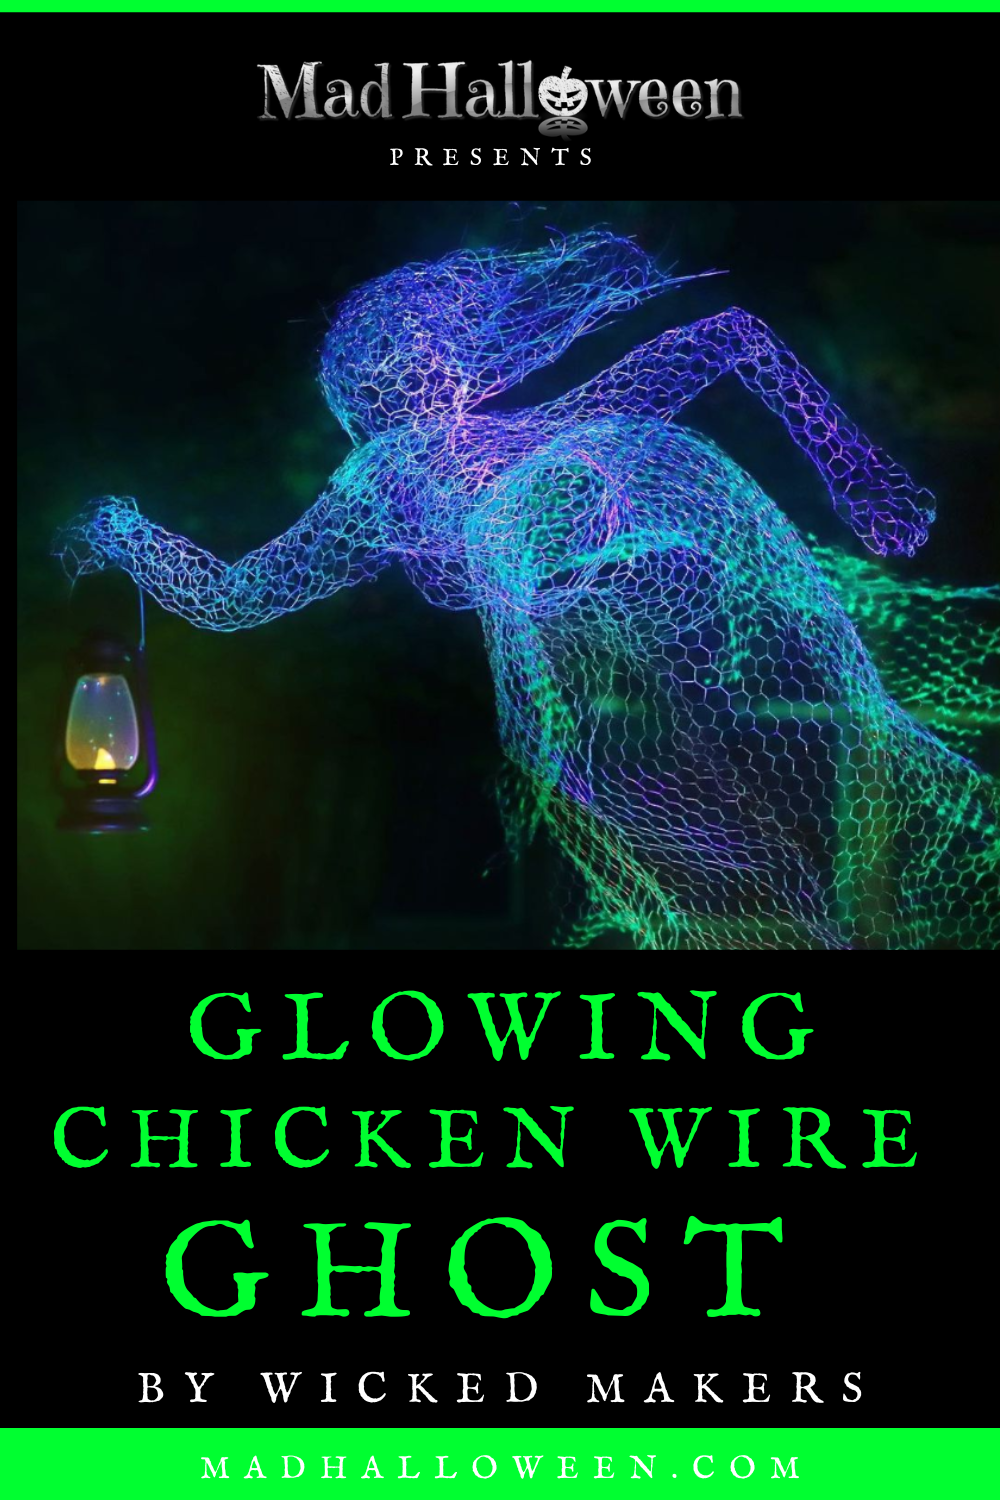 Glowing Chicken Wire Ghost by Wicked Makers - Mad Halloween